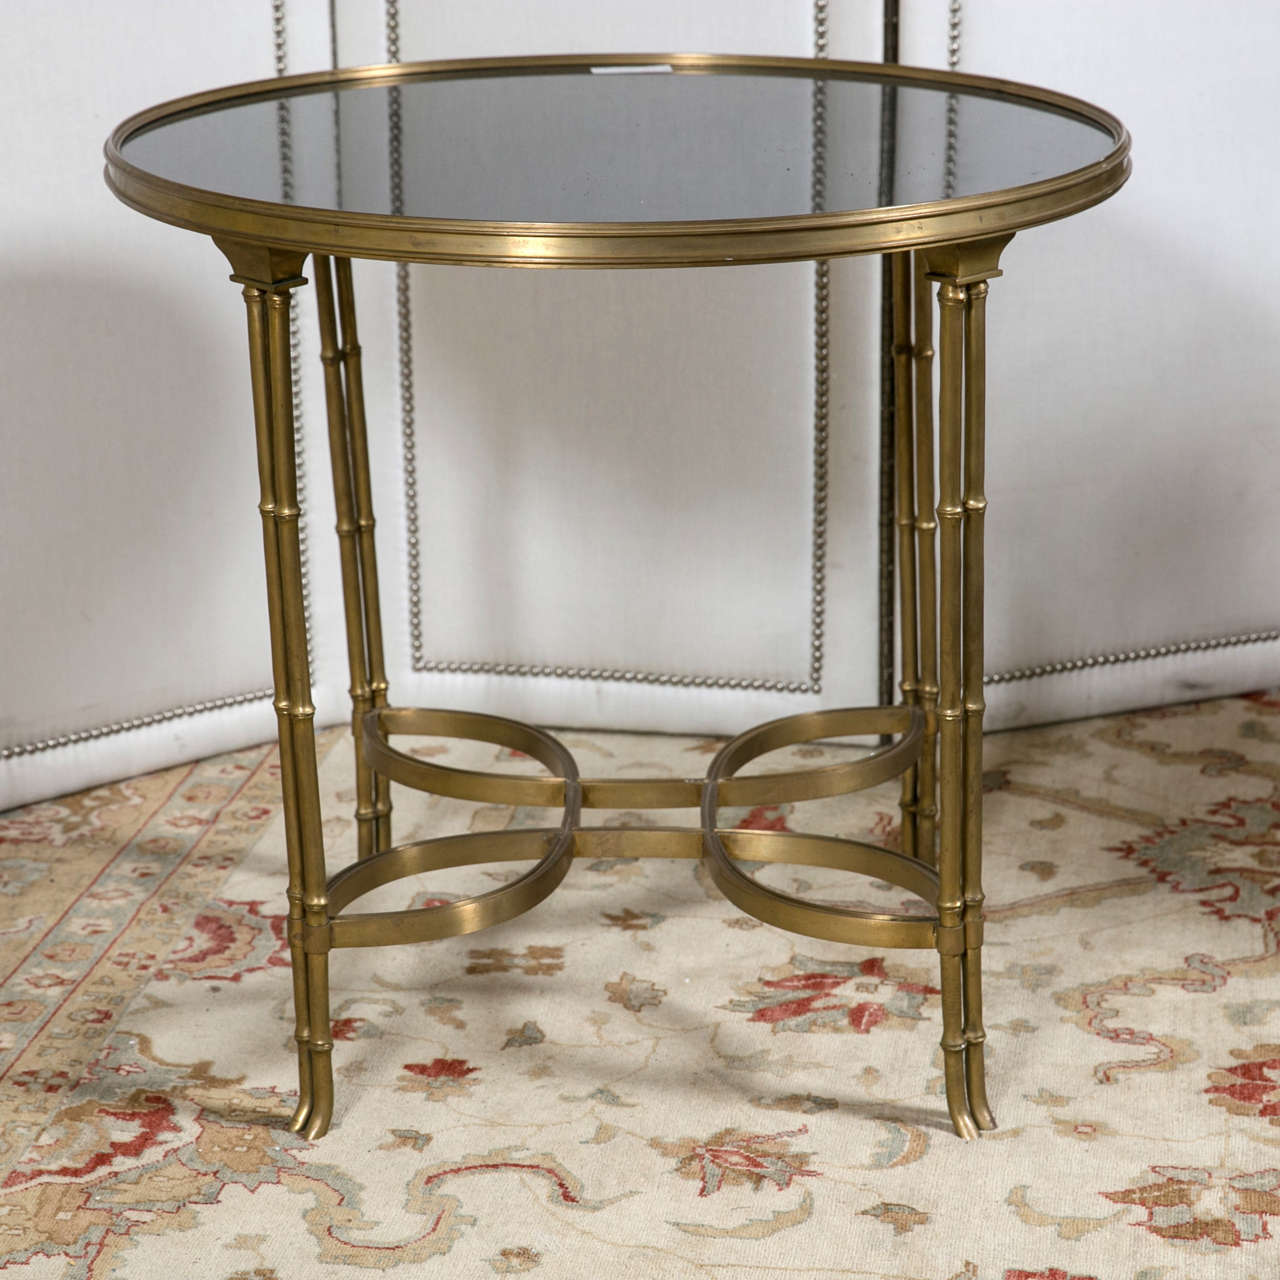 A single marble-top bamboo form bouillotte table. This bronze base of bamboo form having a lower pear shaped undercarriage leading to a group of four legs supporting a bronze framed marble or granite top.